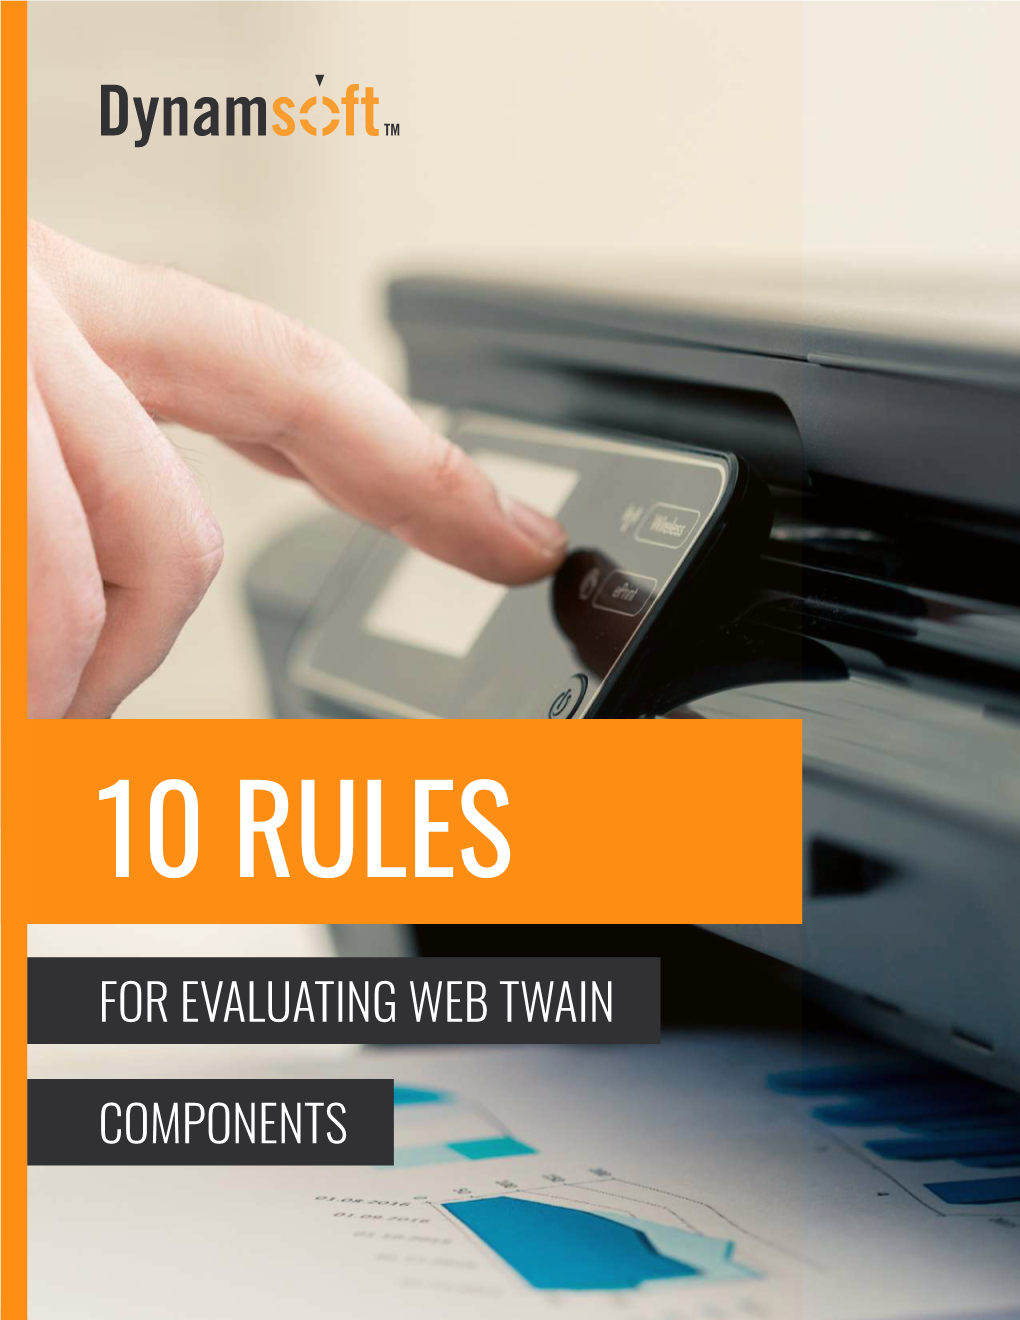 10 Rules for Evaluating Web Twain Components